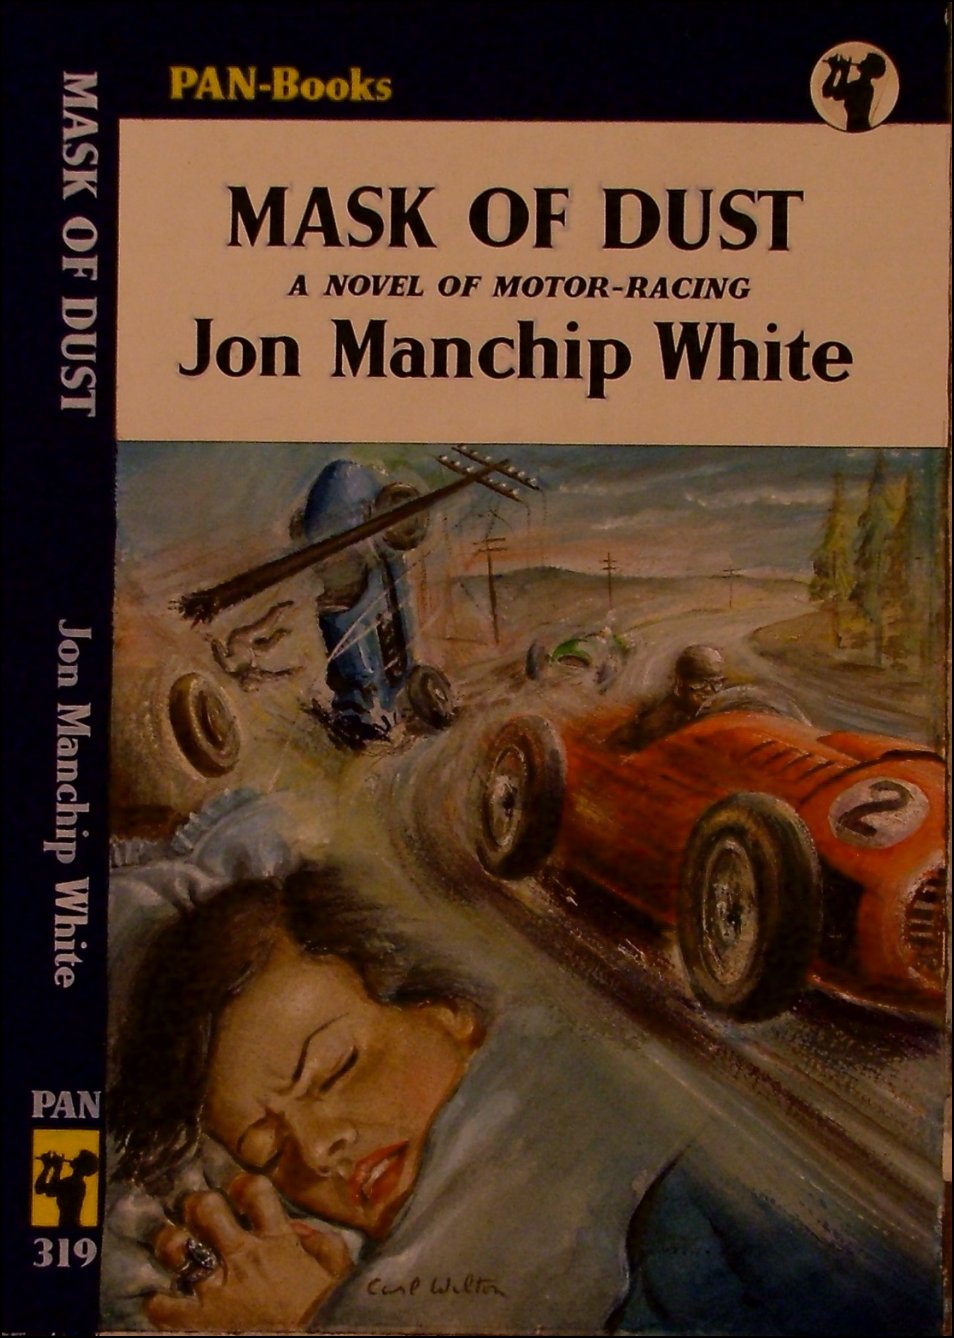 The Mask of Dust